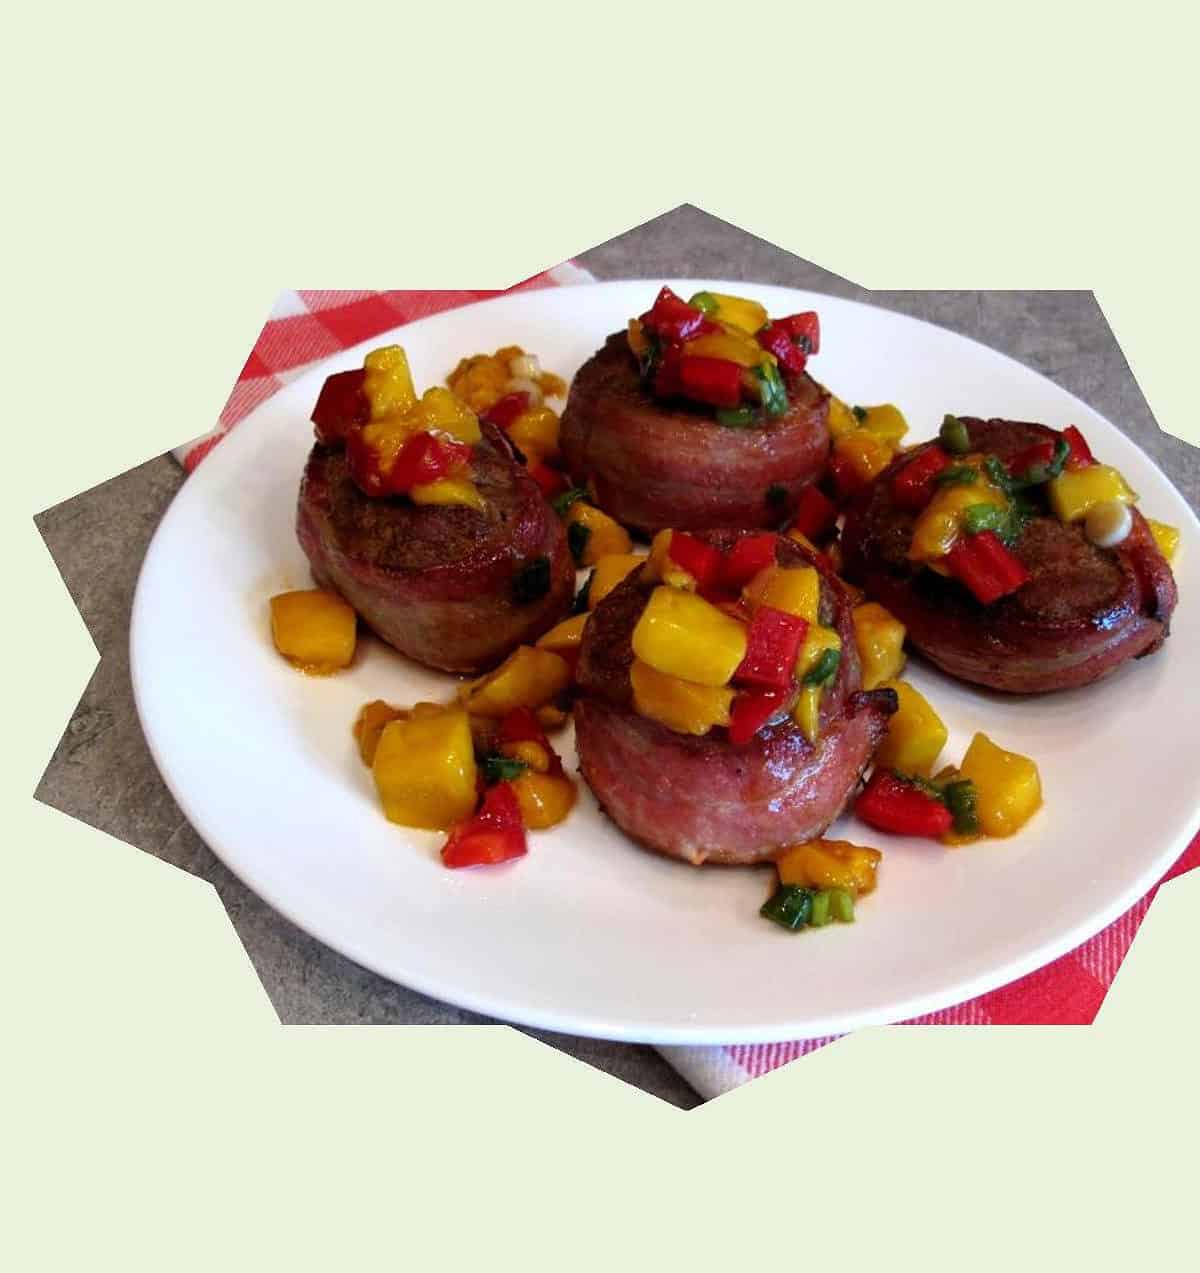  A breathtaking plate of food—pork medallions with a dash of zing from the flavorsome mango.